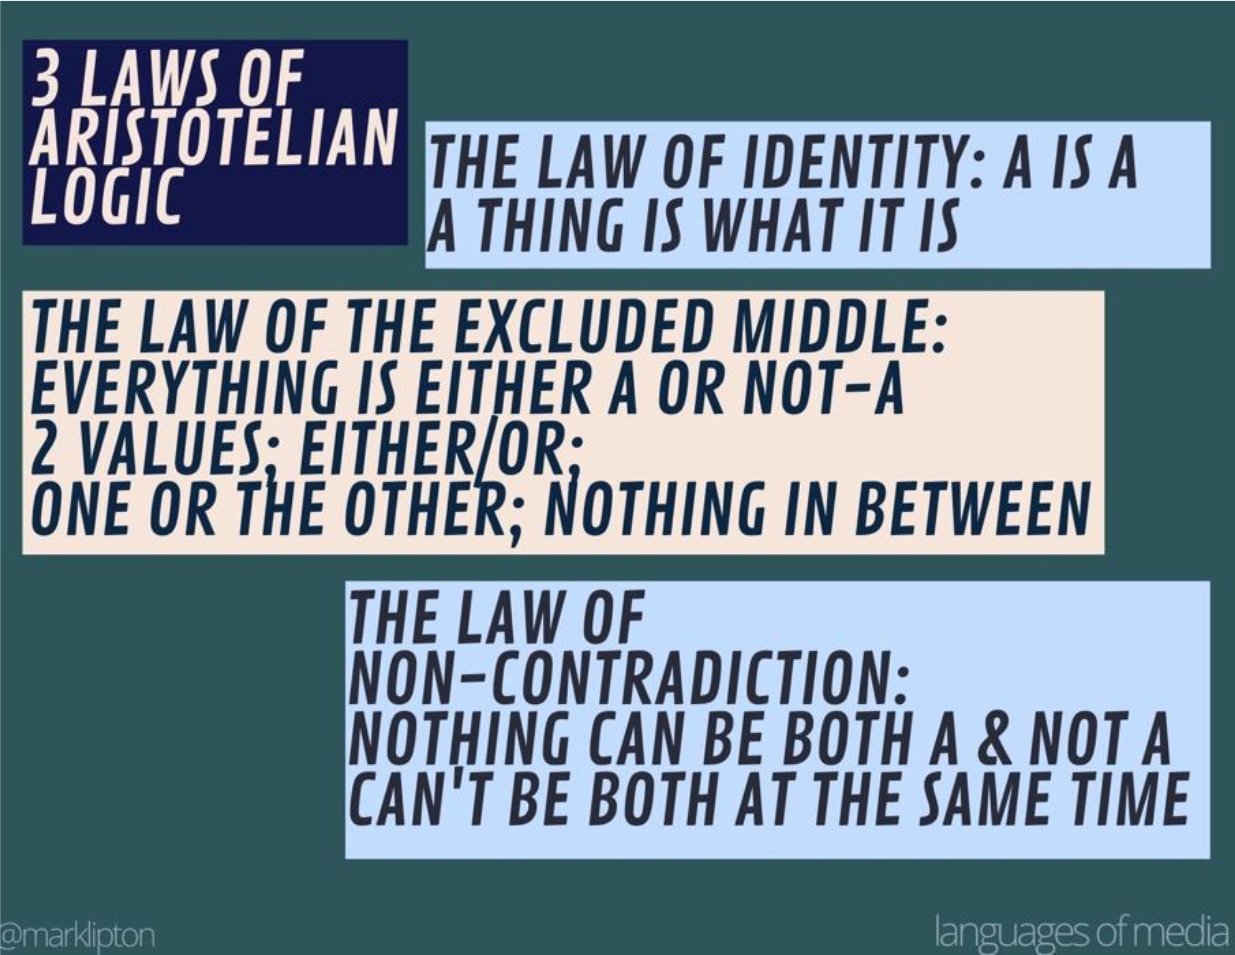 image: THREE LAWS OF ARISTOTELIAN LOGIC ONE: The law of identity: A is A. A thing is what it is. TWO: The law of the excluded middle: everything is either A or not A. There are only two values: either/or; one or the other; nothing in between. THREE: The Law of Non-Contradiction: nothing can be both A and not A; can't be both at the same time.